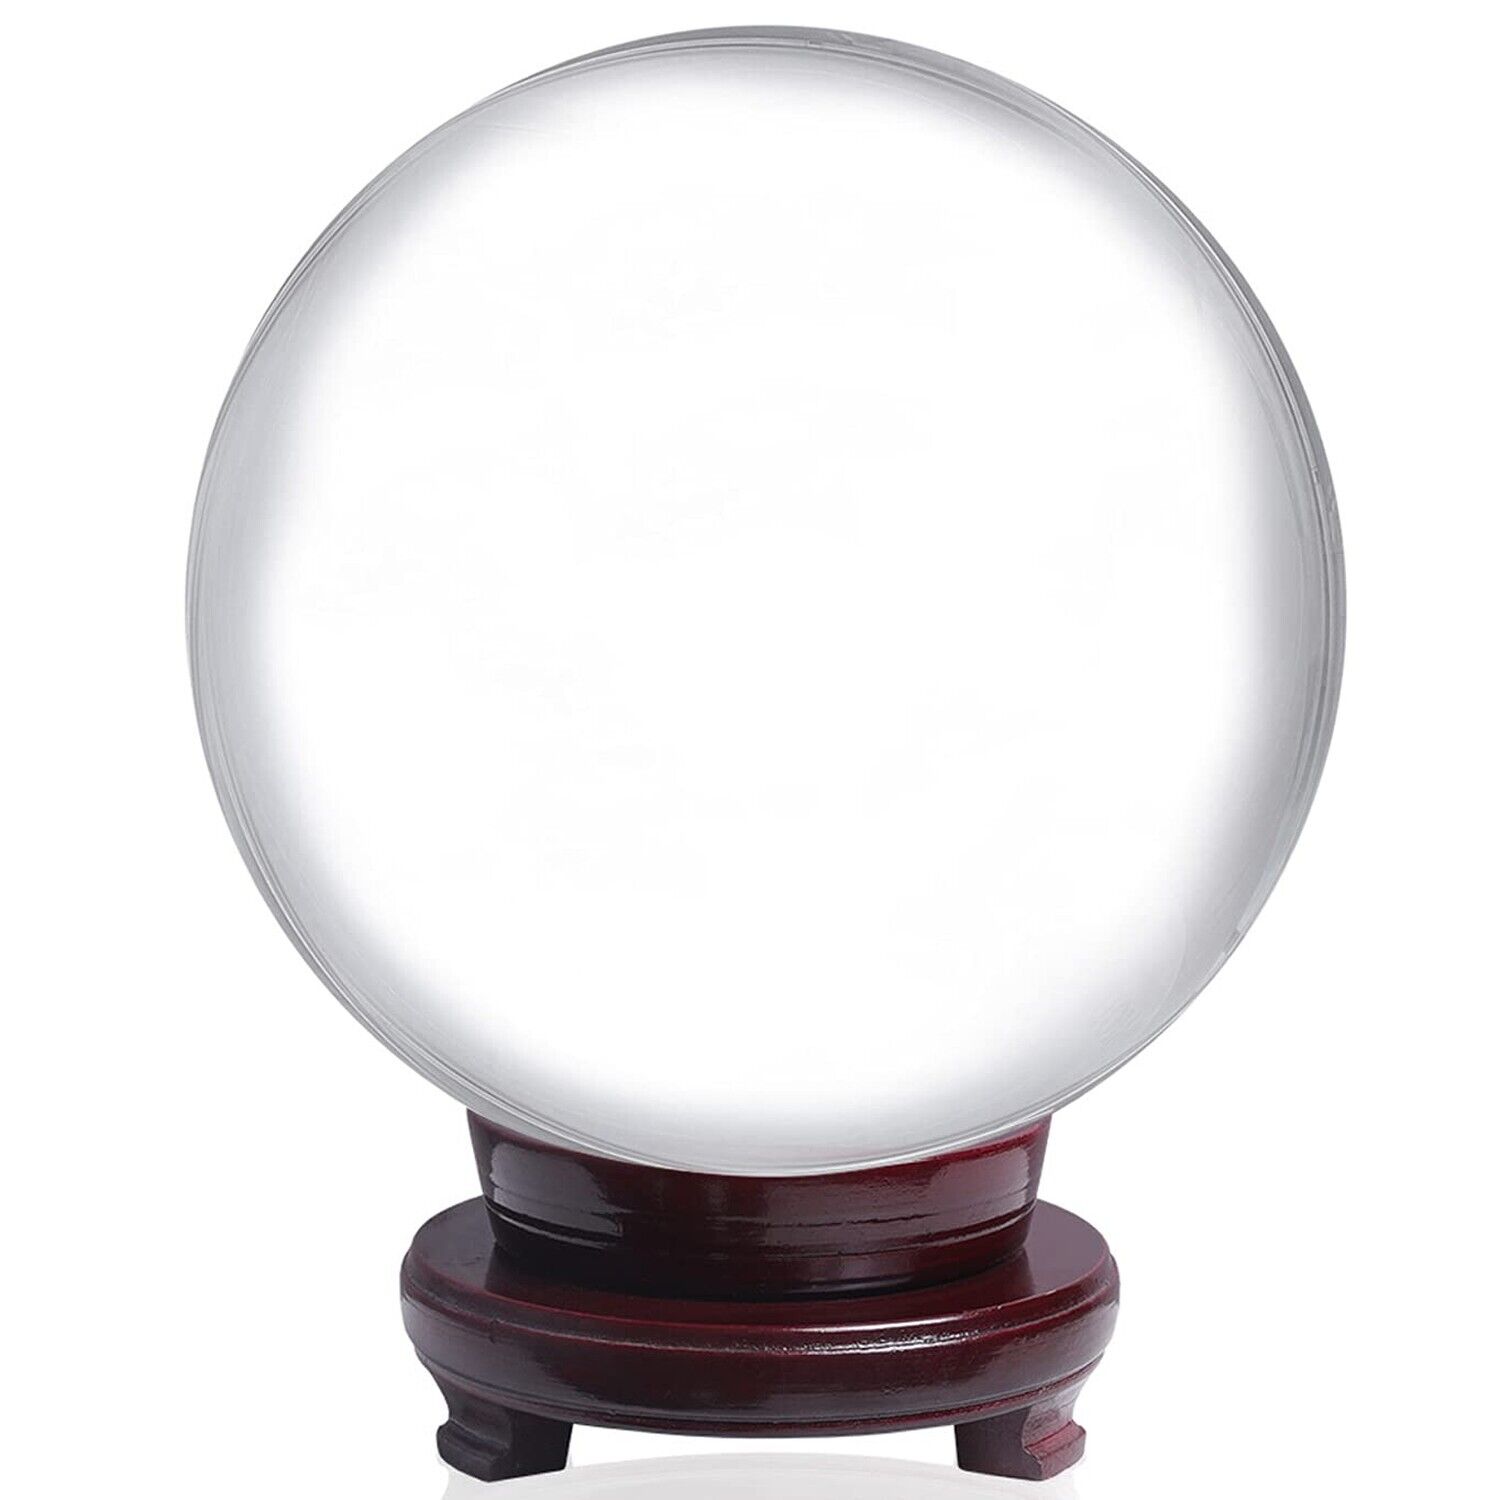 LONGWIN 200mm(8 inch) Huge Clear Divination Crystal Ball Meditation Glass Sph...